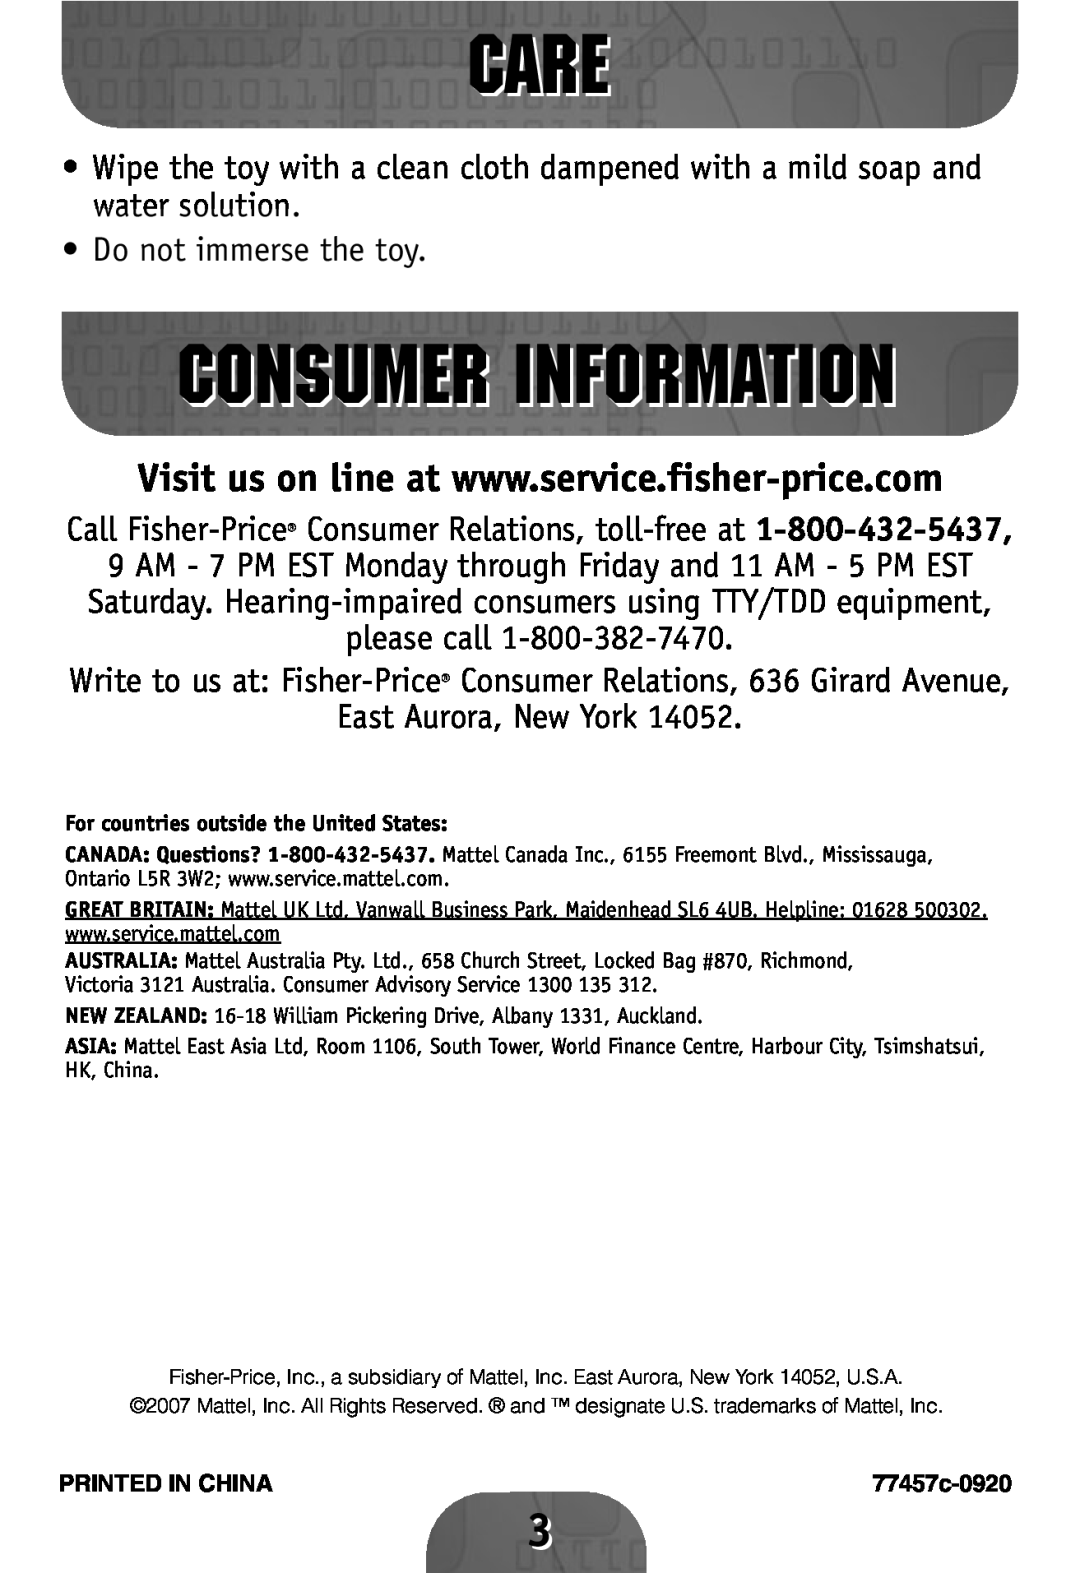 Fisher-Price 77460, 77457, 77458, 77459 instruction sheet Care, Consumer Information 